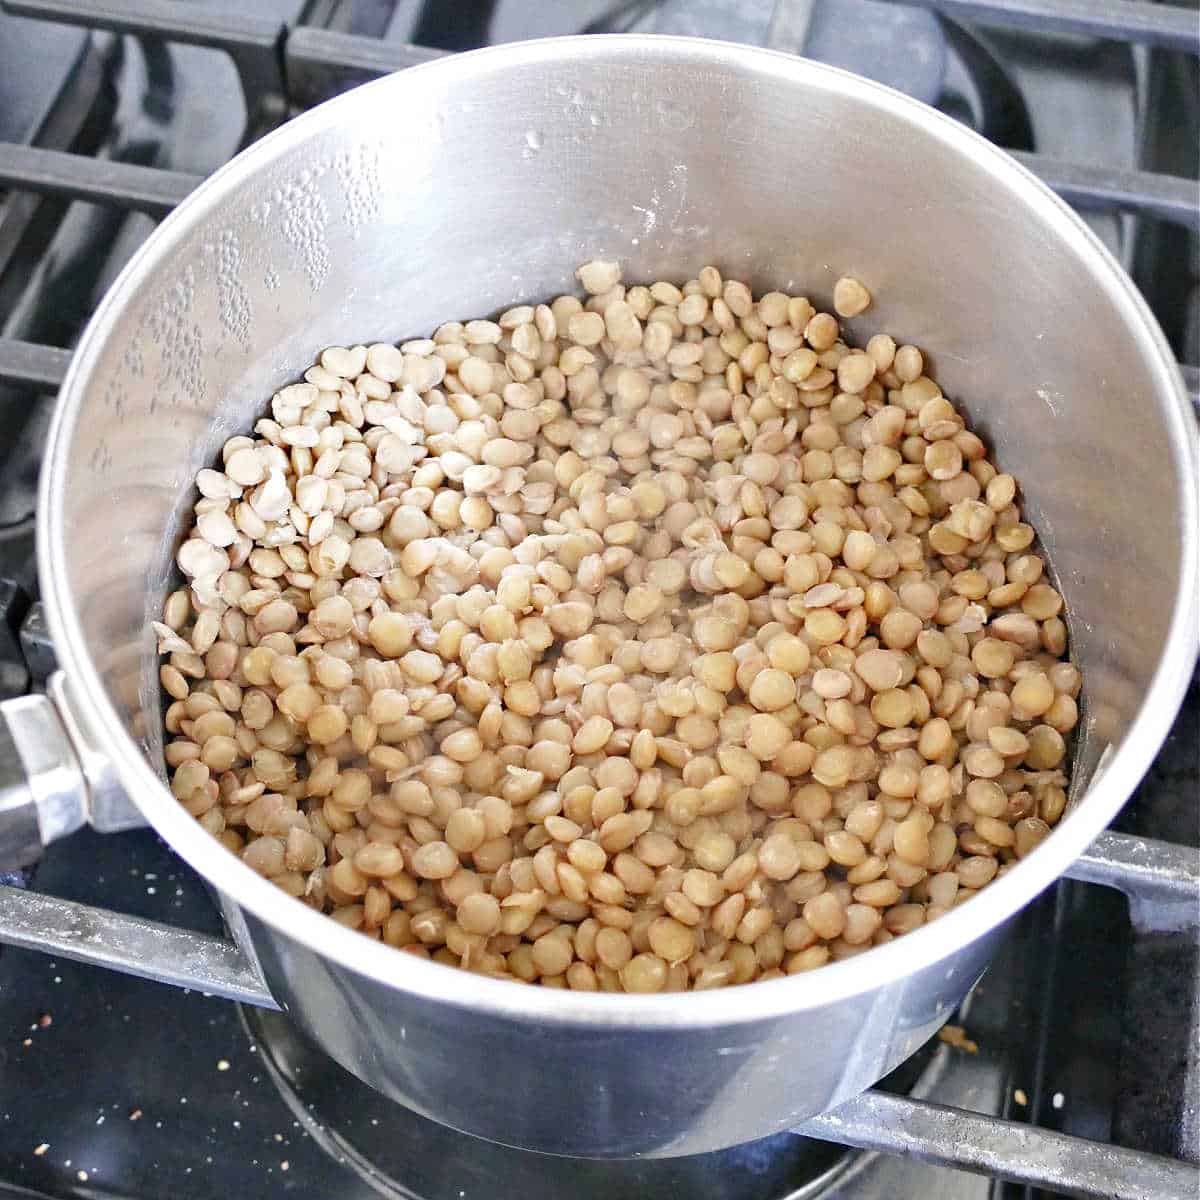 brown lentils cooking in a saucepan over a stove